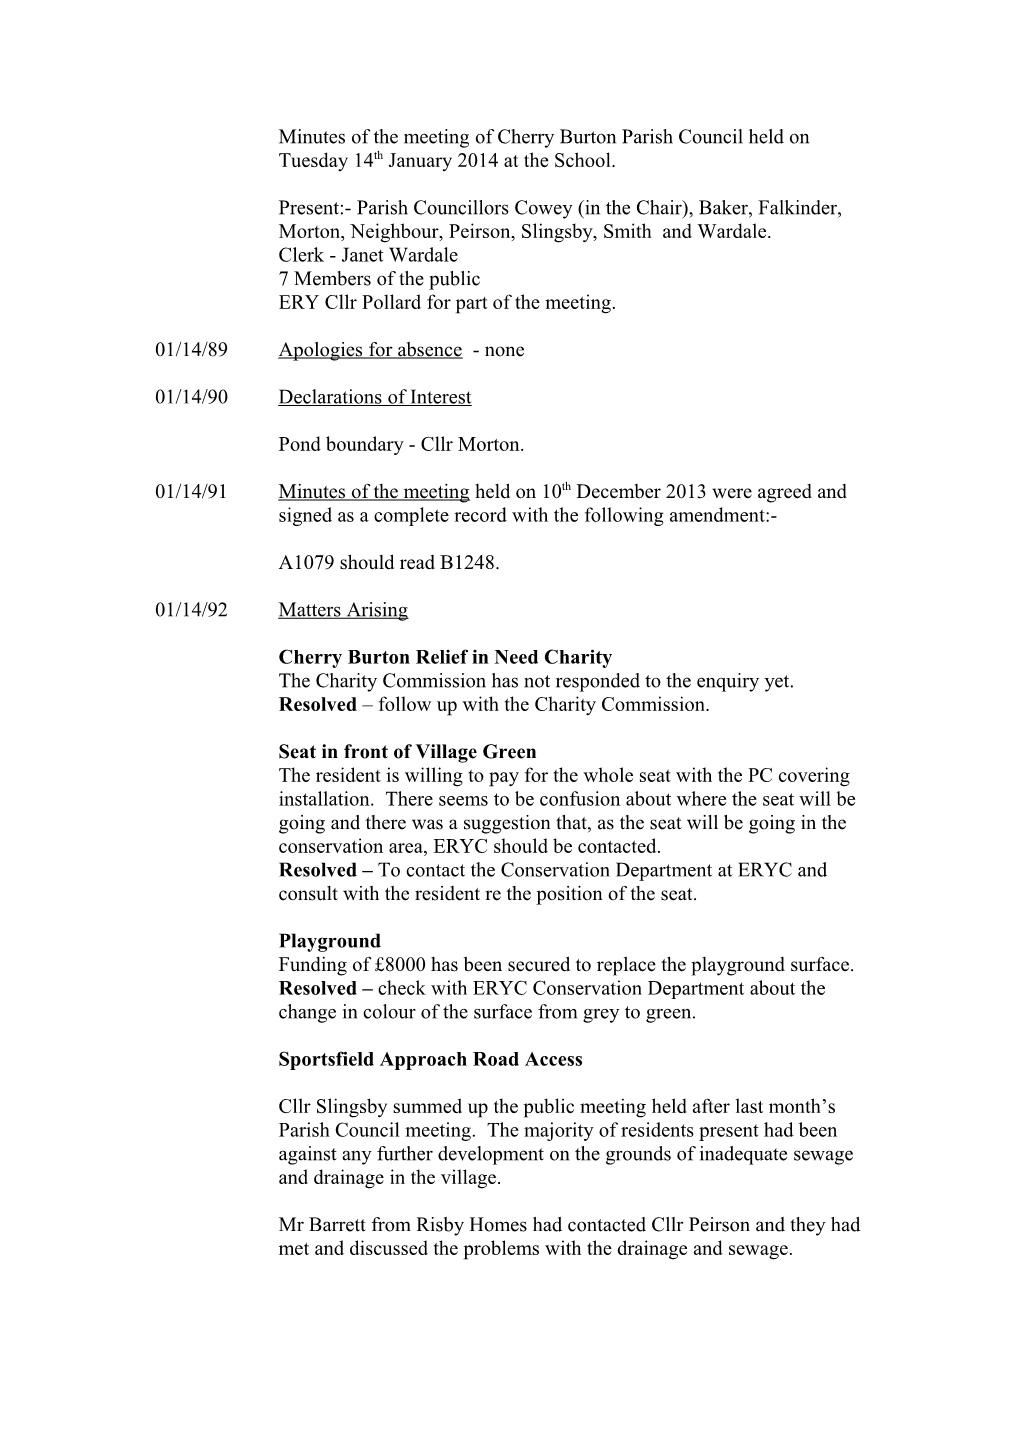 Minutes of the Annual Meeting of Cherry Burton Parish Council Held on Tuesday 12Th May 2009